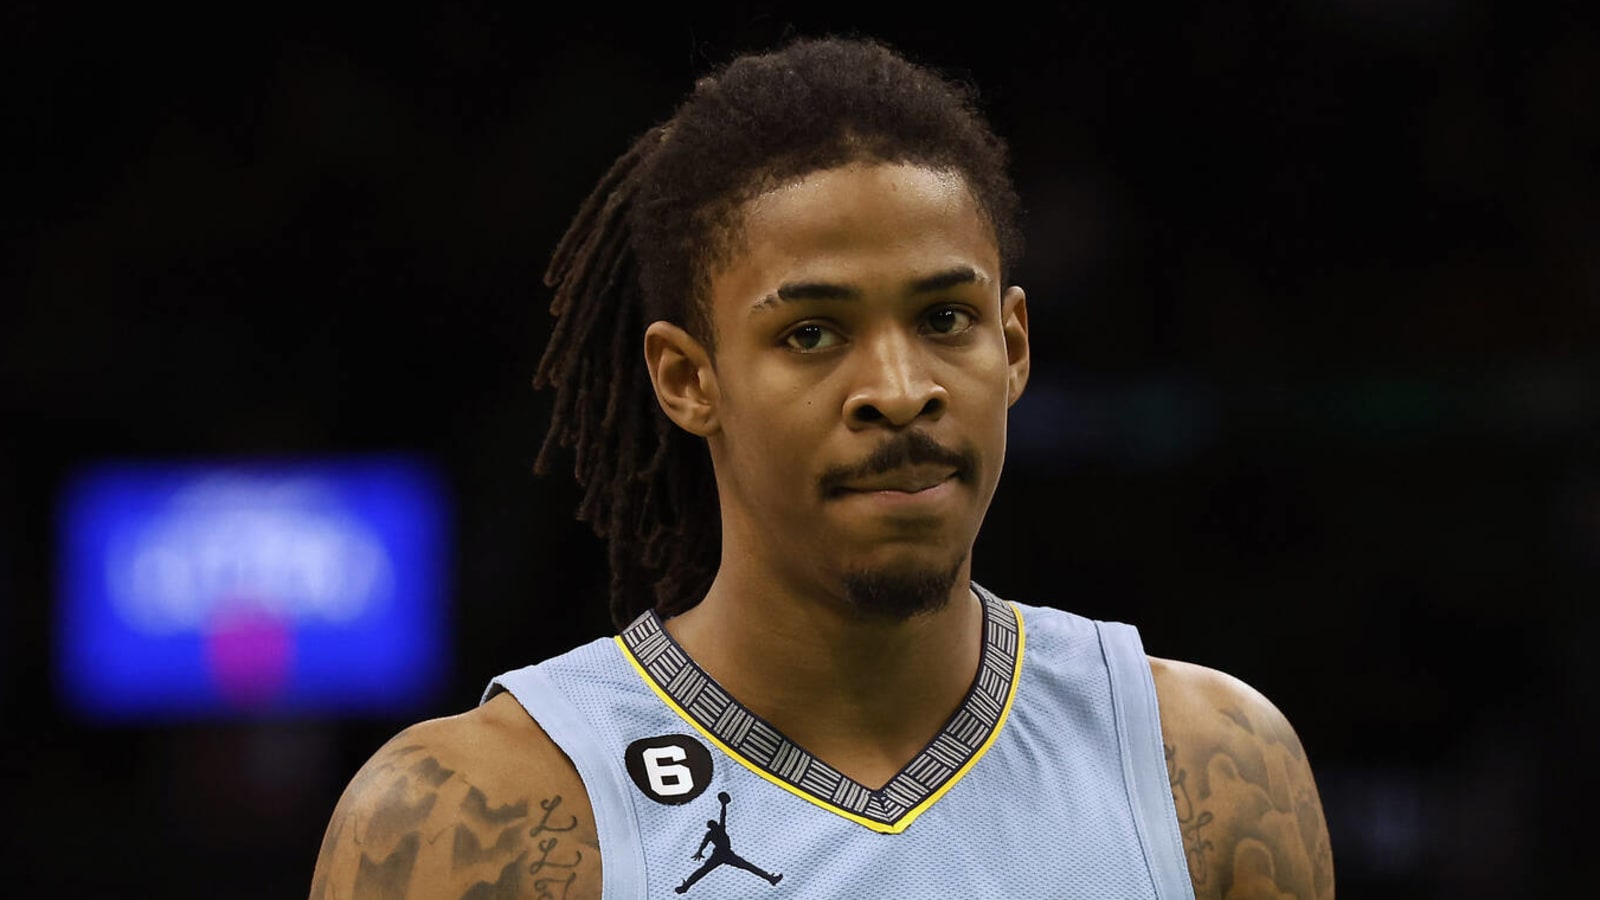 Powerade Signs Ja Morant to Multiyear Deal to Be Its New Face